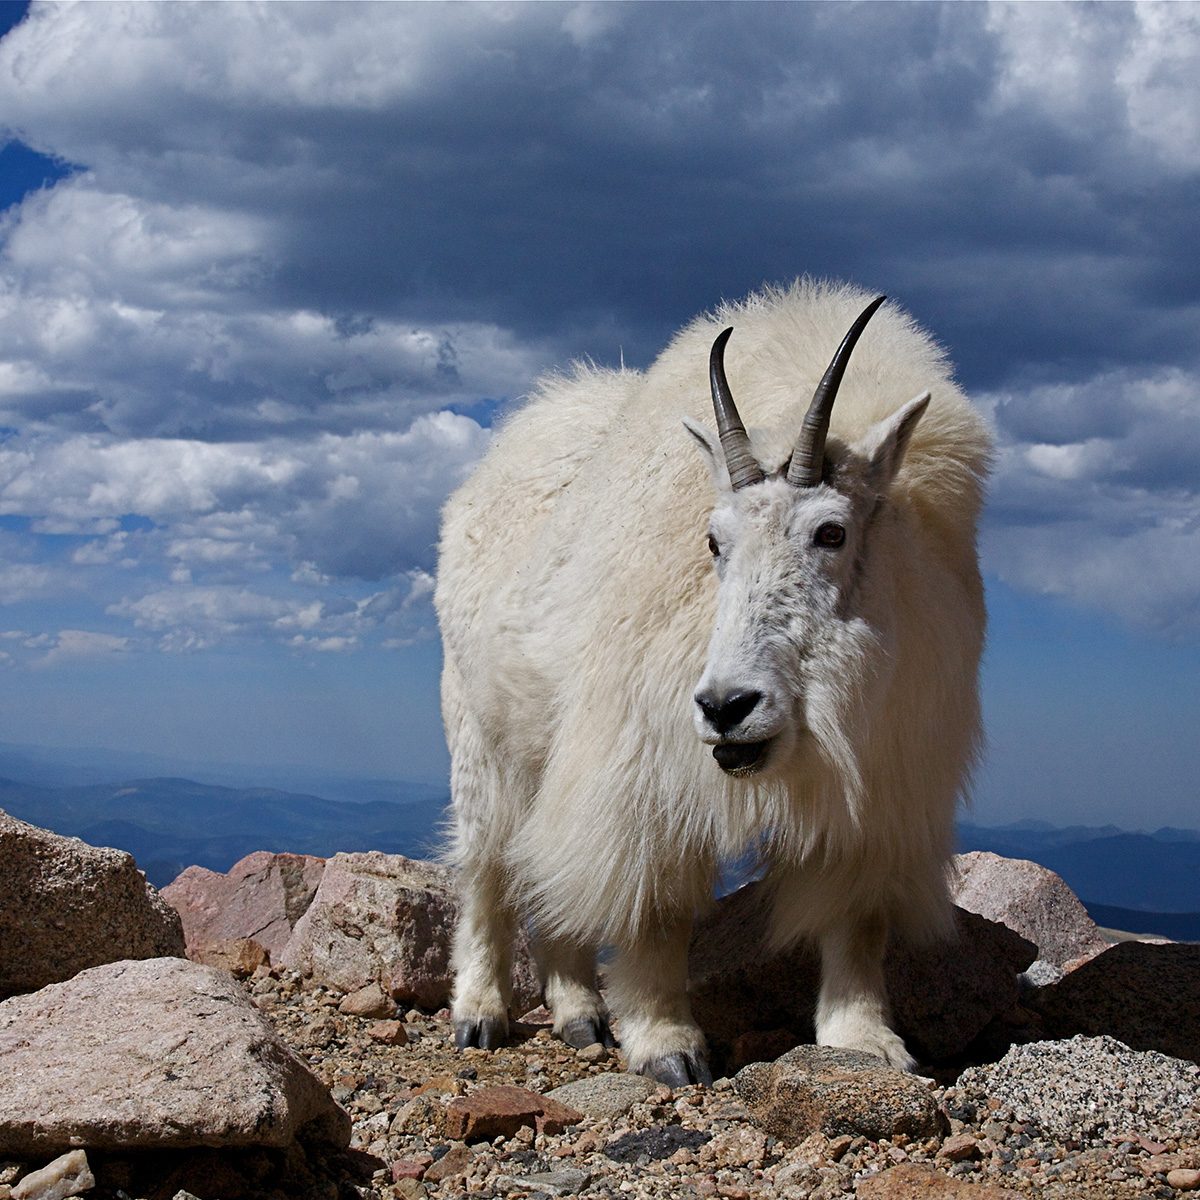 Mountain Goat in the clouds at 14,000 feet above sea level